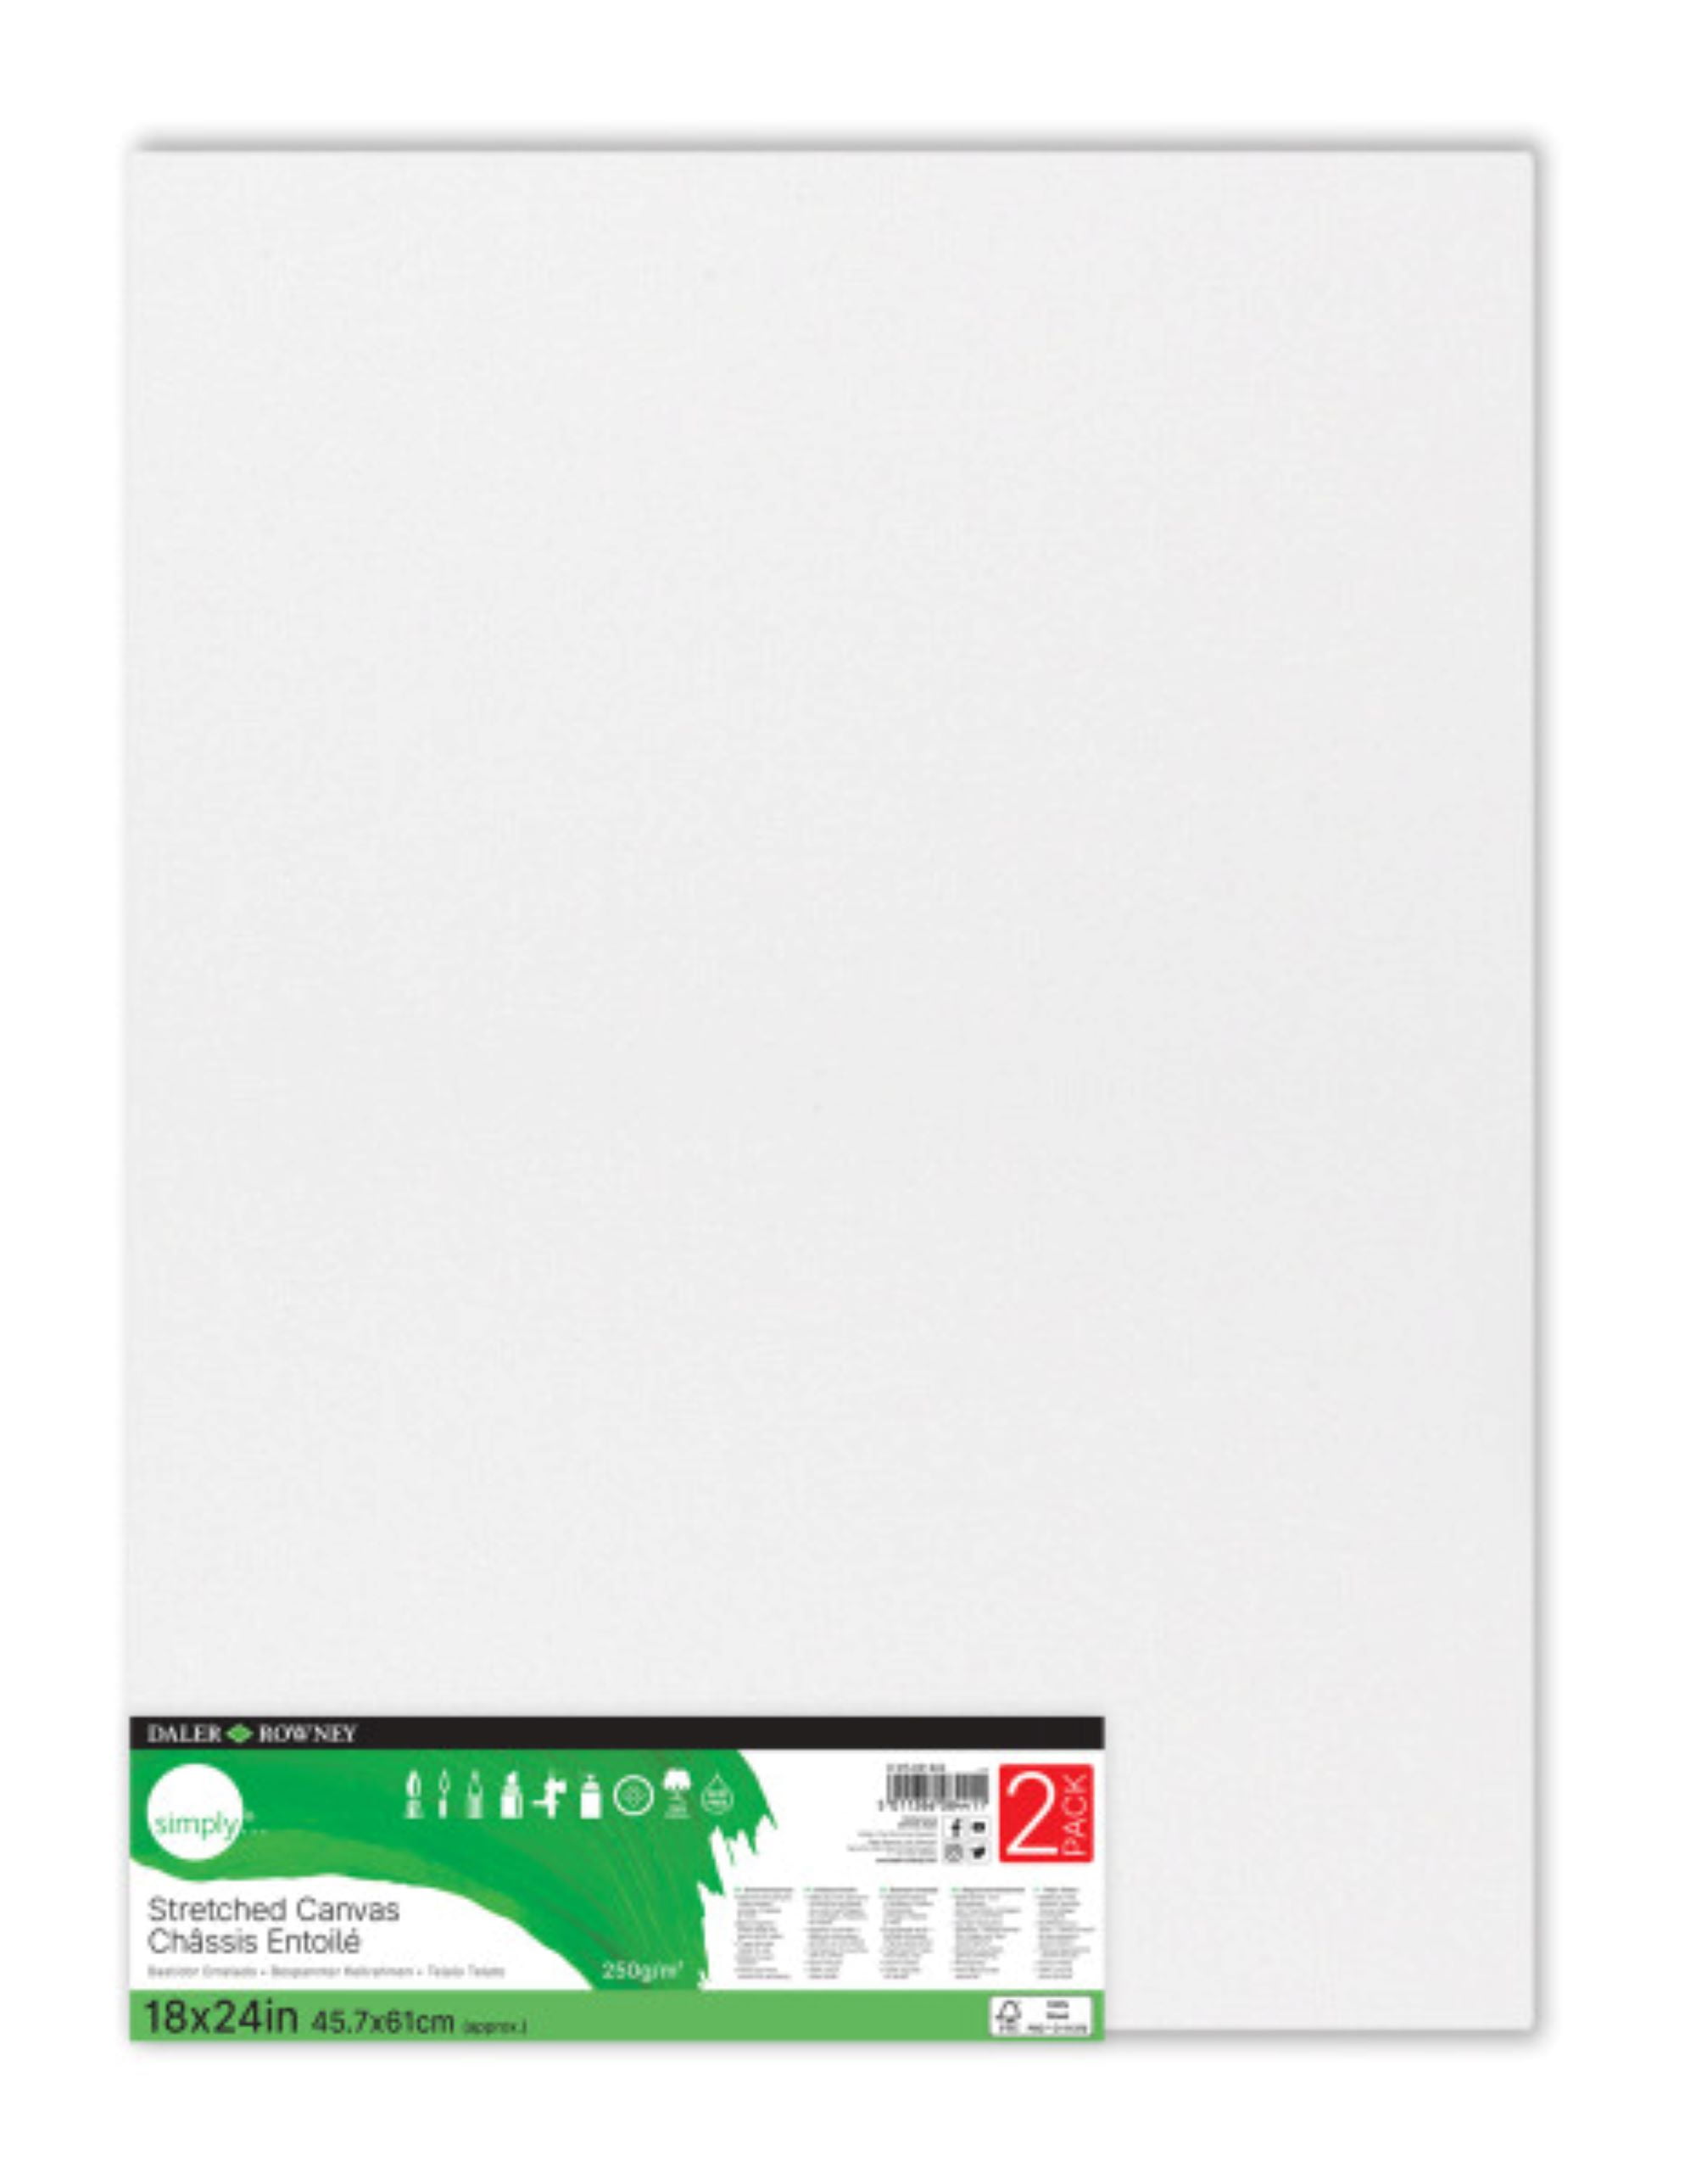 Daler-Rowney Simply Stretched Canvas, White Art Canvas, 18 x 24, 2 Pk